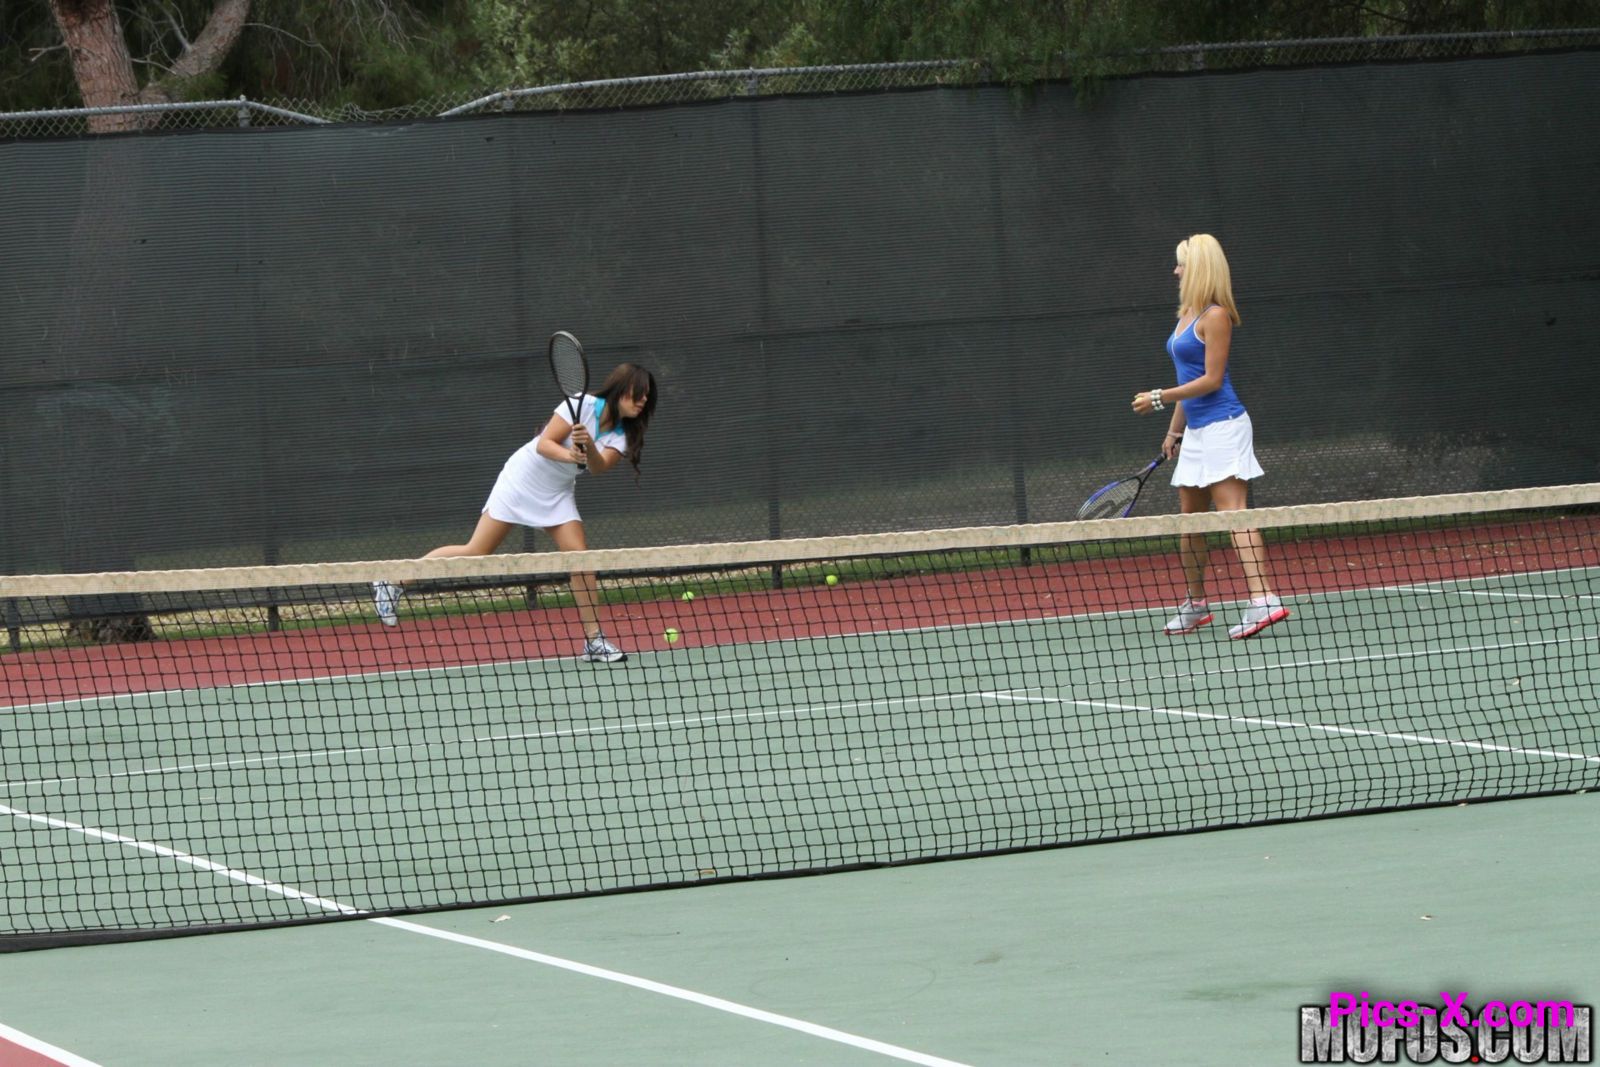 Tennis Lessons: How to Handle the Balls - Pervs On Patrol - Image 2